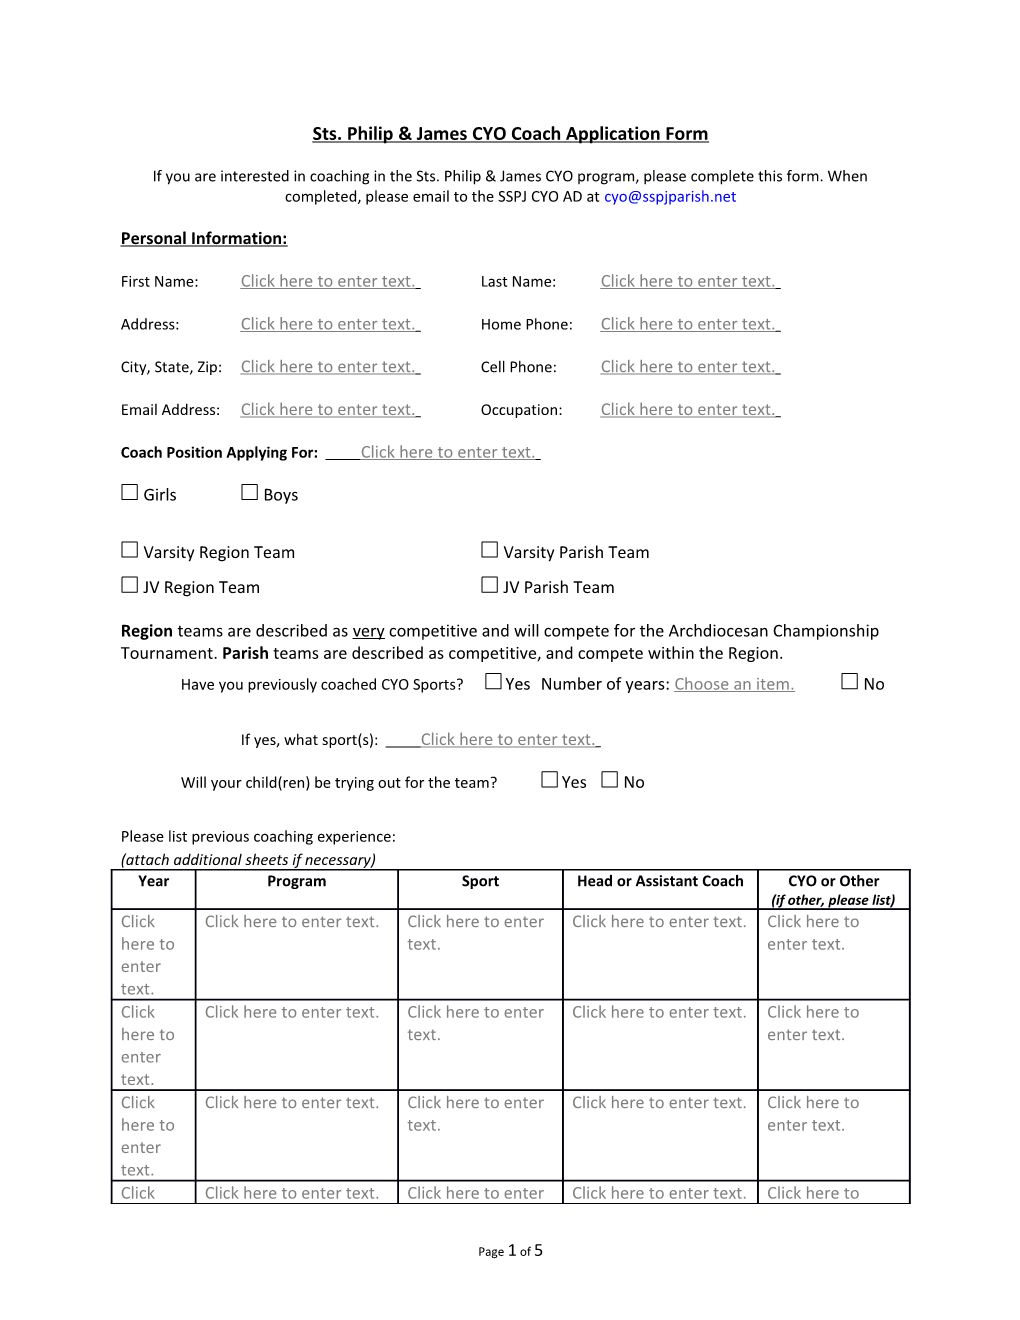 Sts. Philip James CYO Coach Application Form